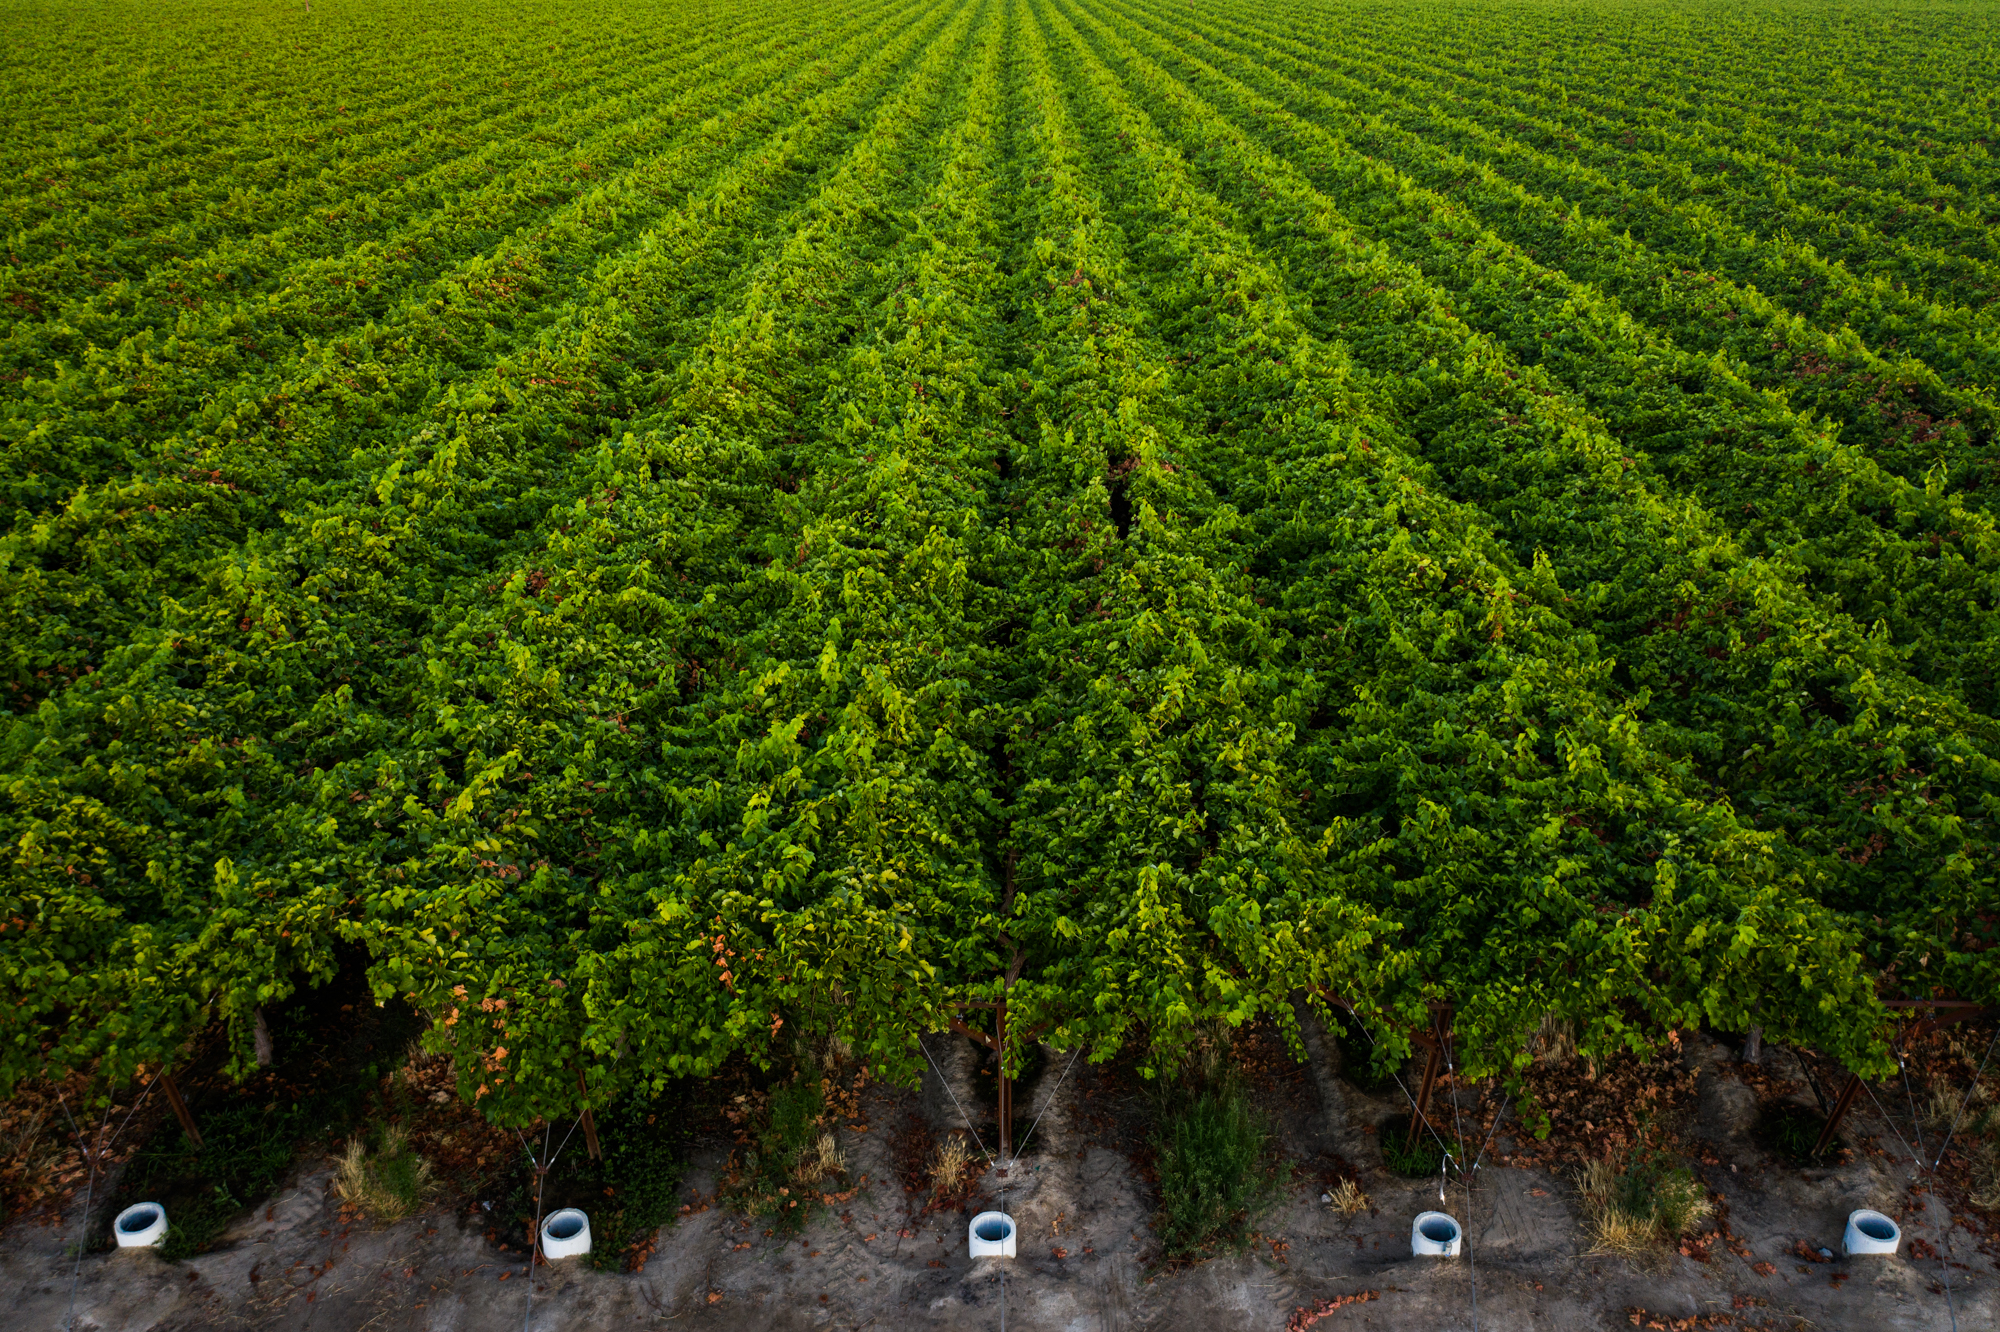 Rows of table grapes grown by Fowler Packing